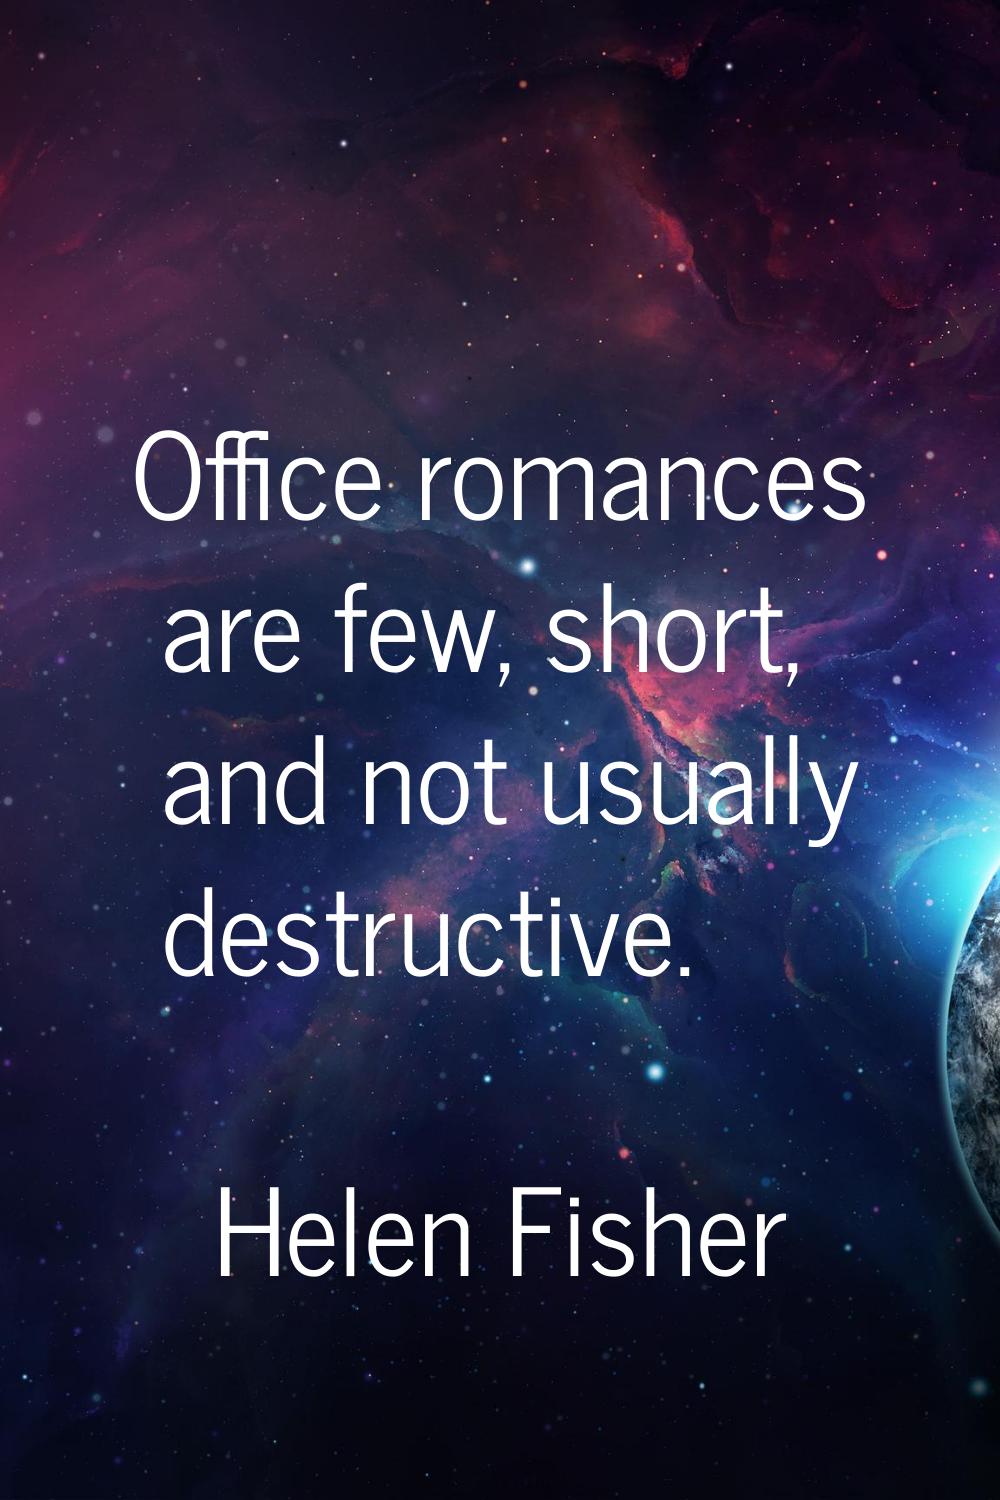 Office romances are few, short, and not usually destructive.